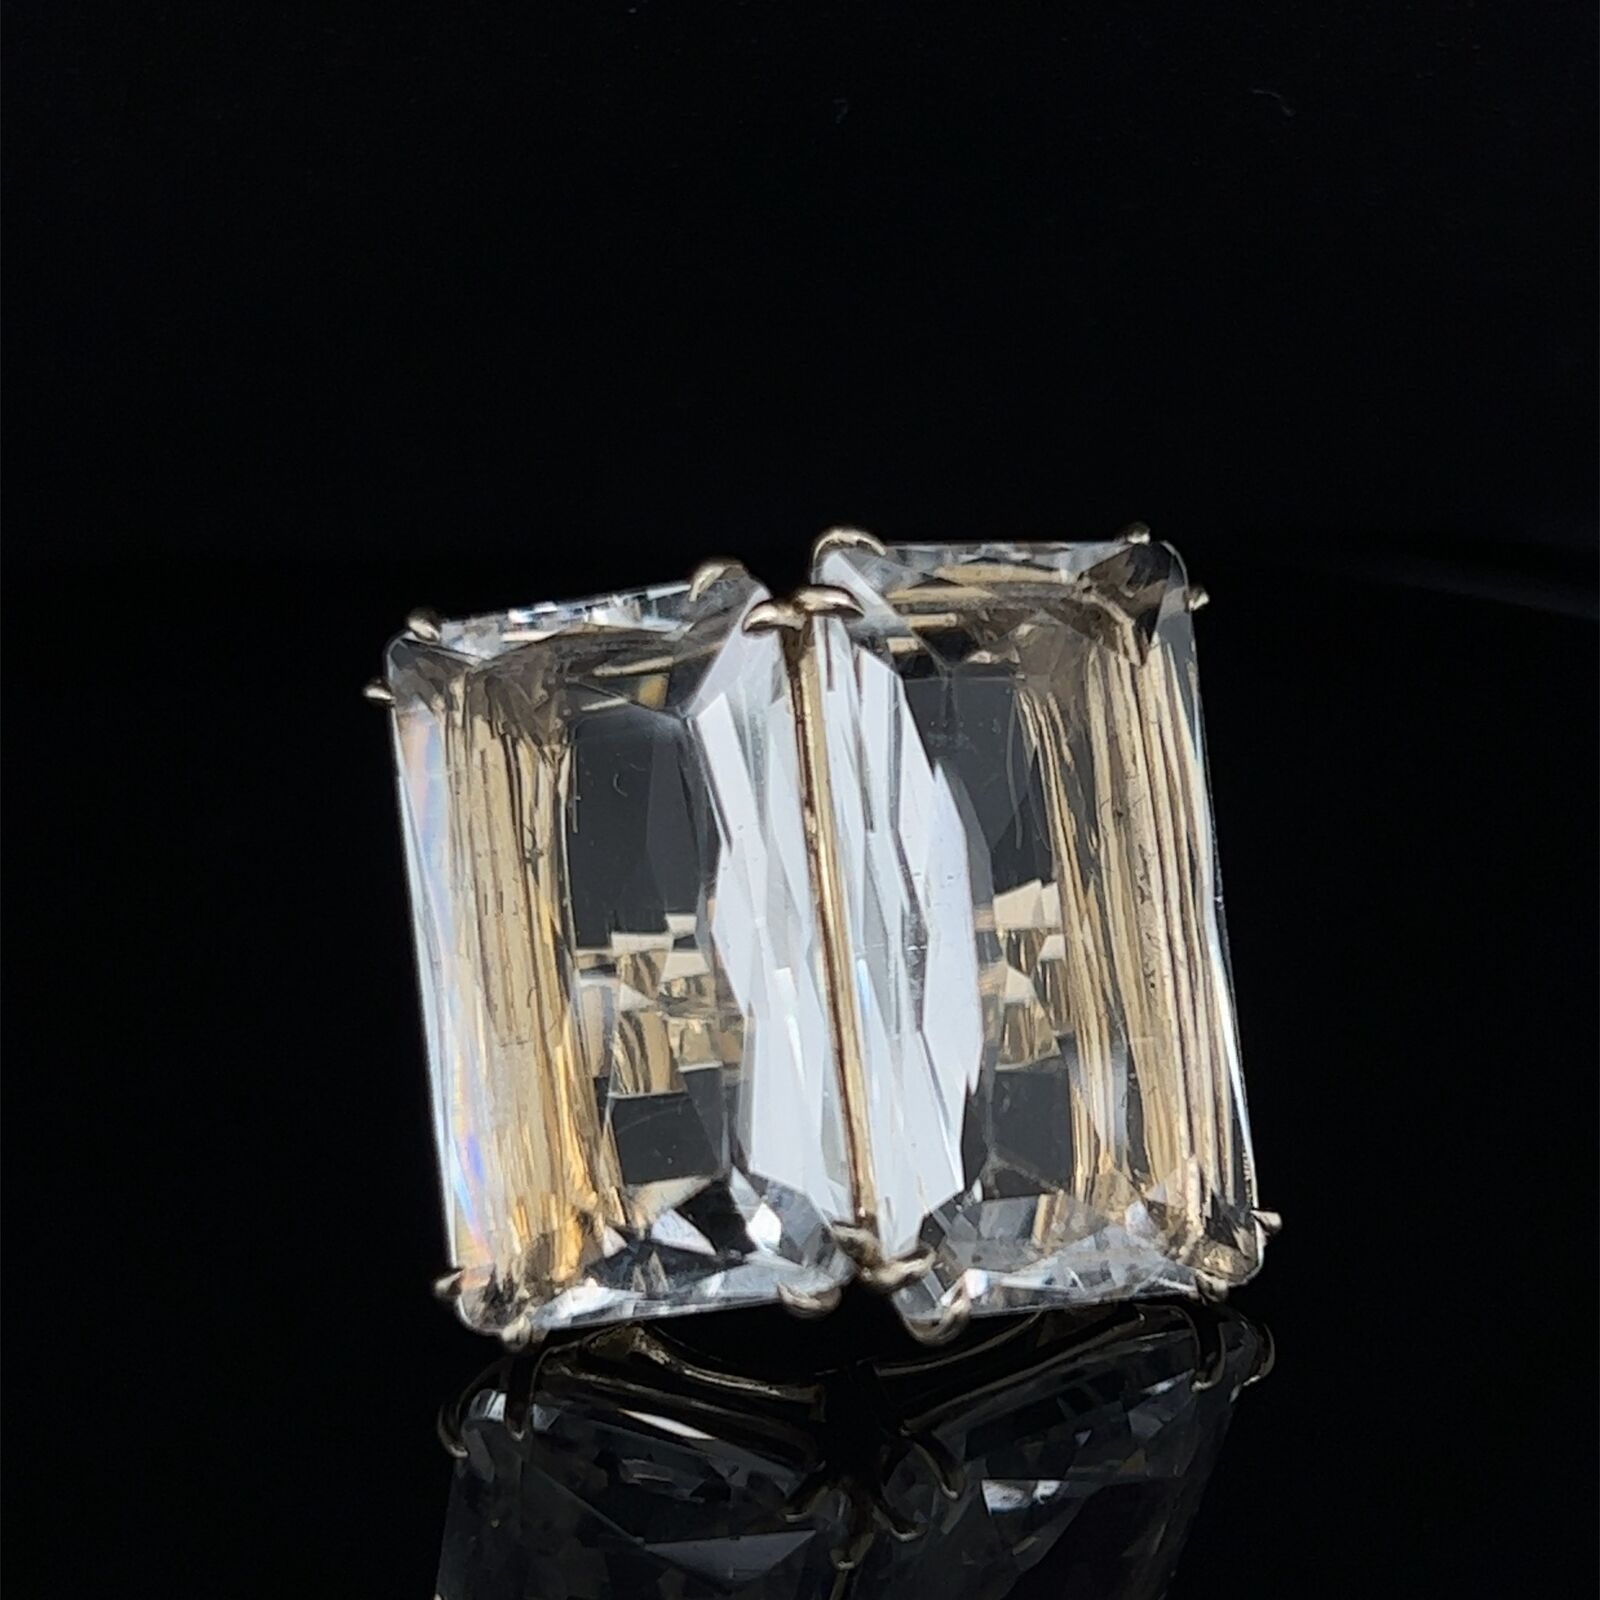 This large authentic and impressive ring is by H.Stern Cobblestone Collection. It is crafted from 18k yellow gold featuring an double frame open bridge set with 2 large rectangle faceted cut clear rock crystal gemstones, these are held securely in 4